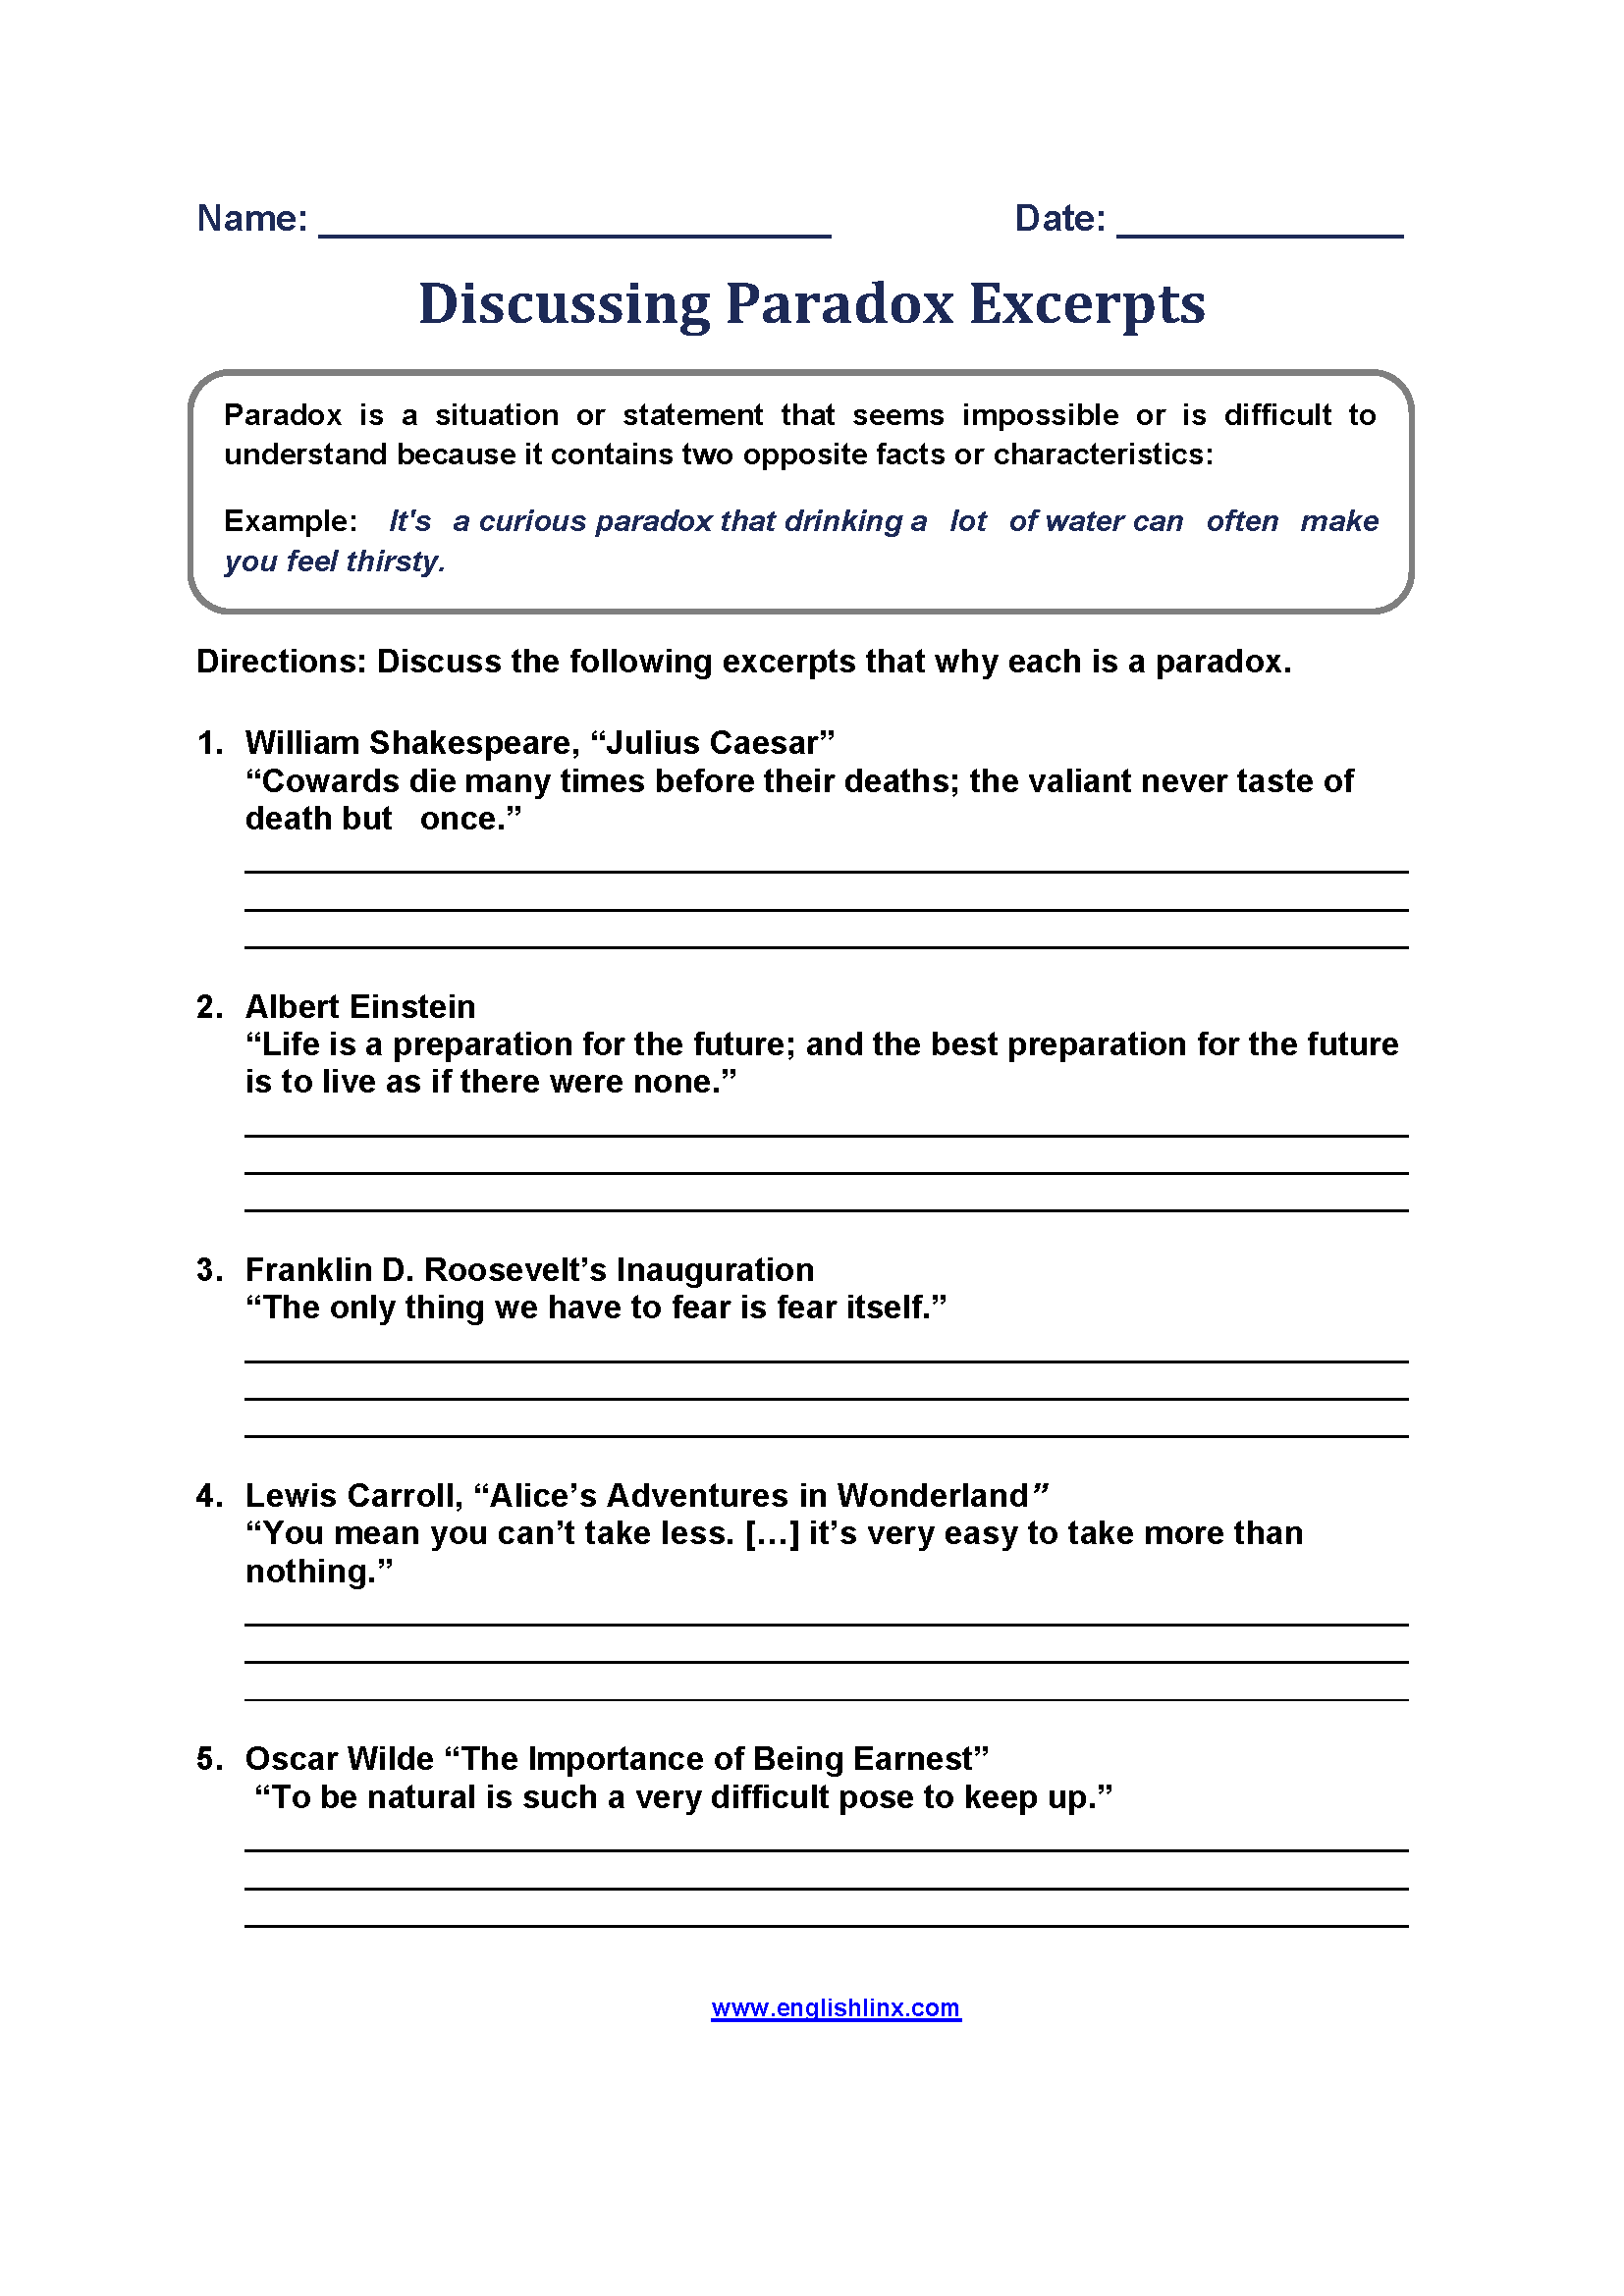 Paradox Discussion Worksheets